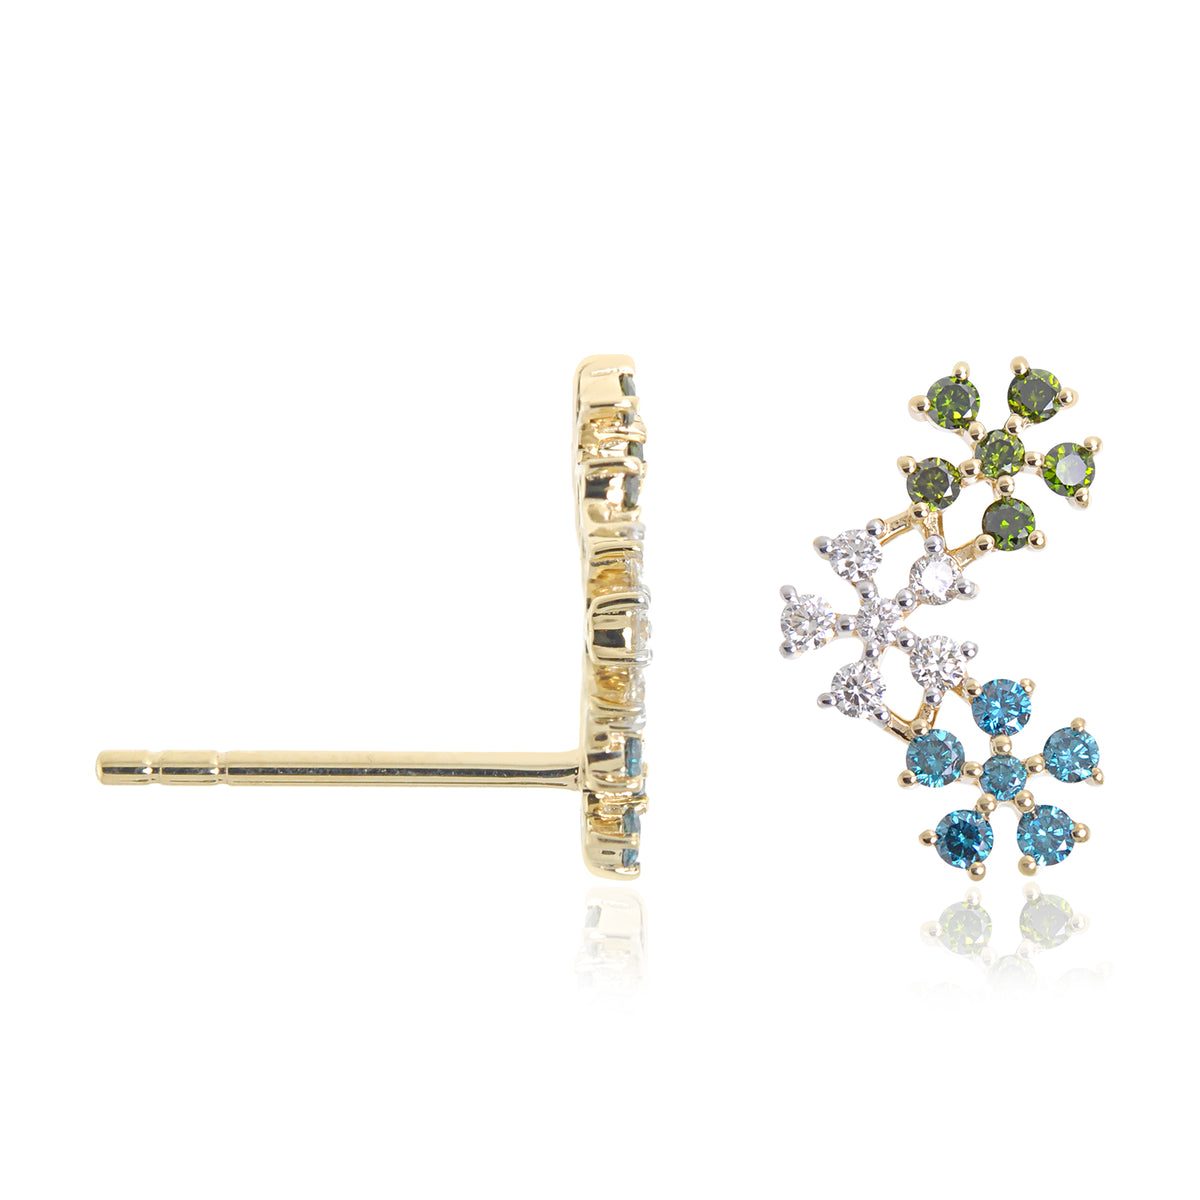 The Blooms 14K Gemstone Climber, Right